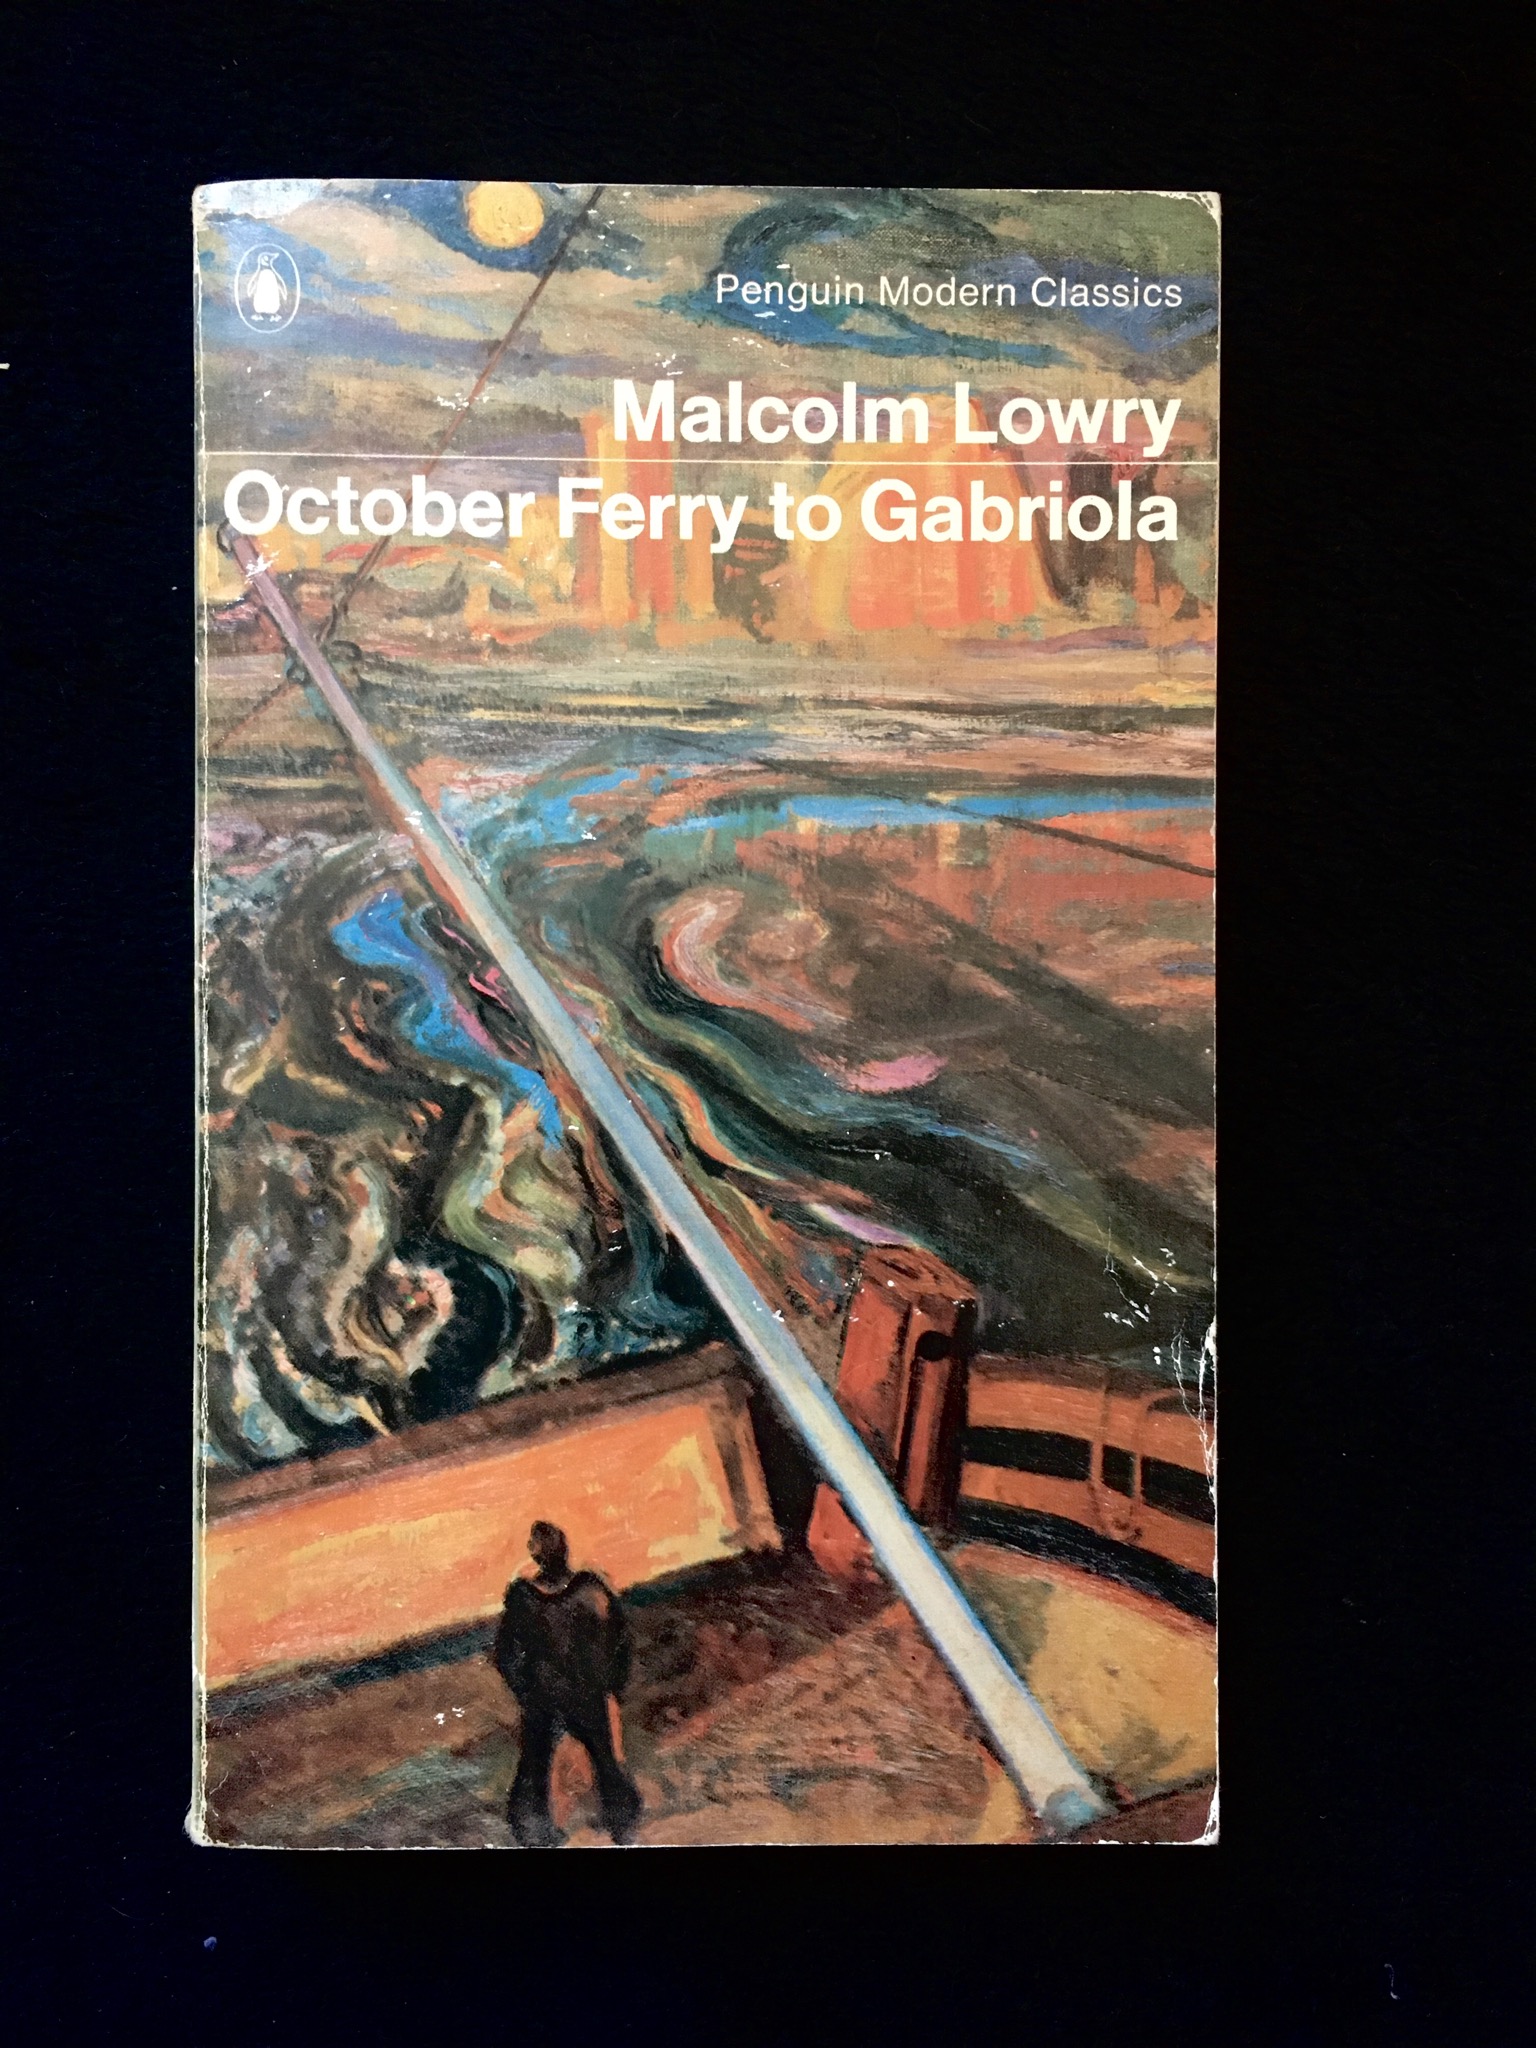 October Ferry to Gabriola by Malcolm Lowry